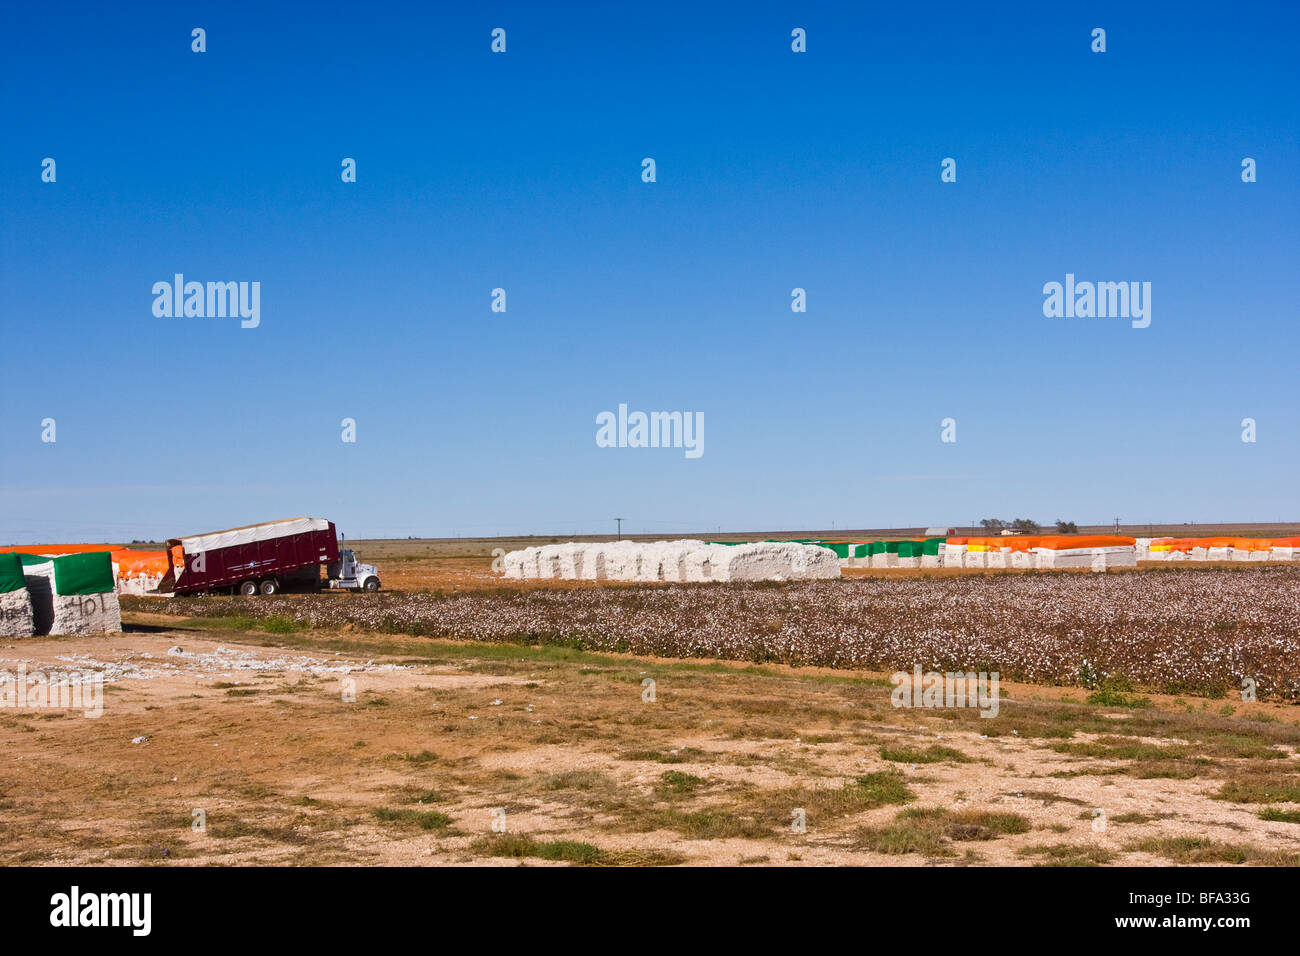 Cotton module is moved with a maroon colored module truck to the processing area at a cotton gin in Lamesa, Texas,U.S.A. Stock Photo